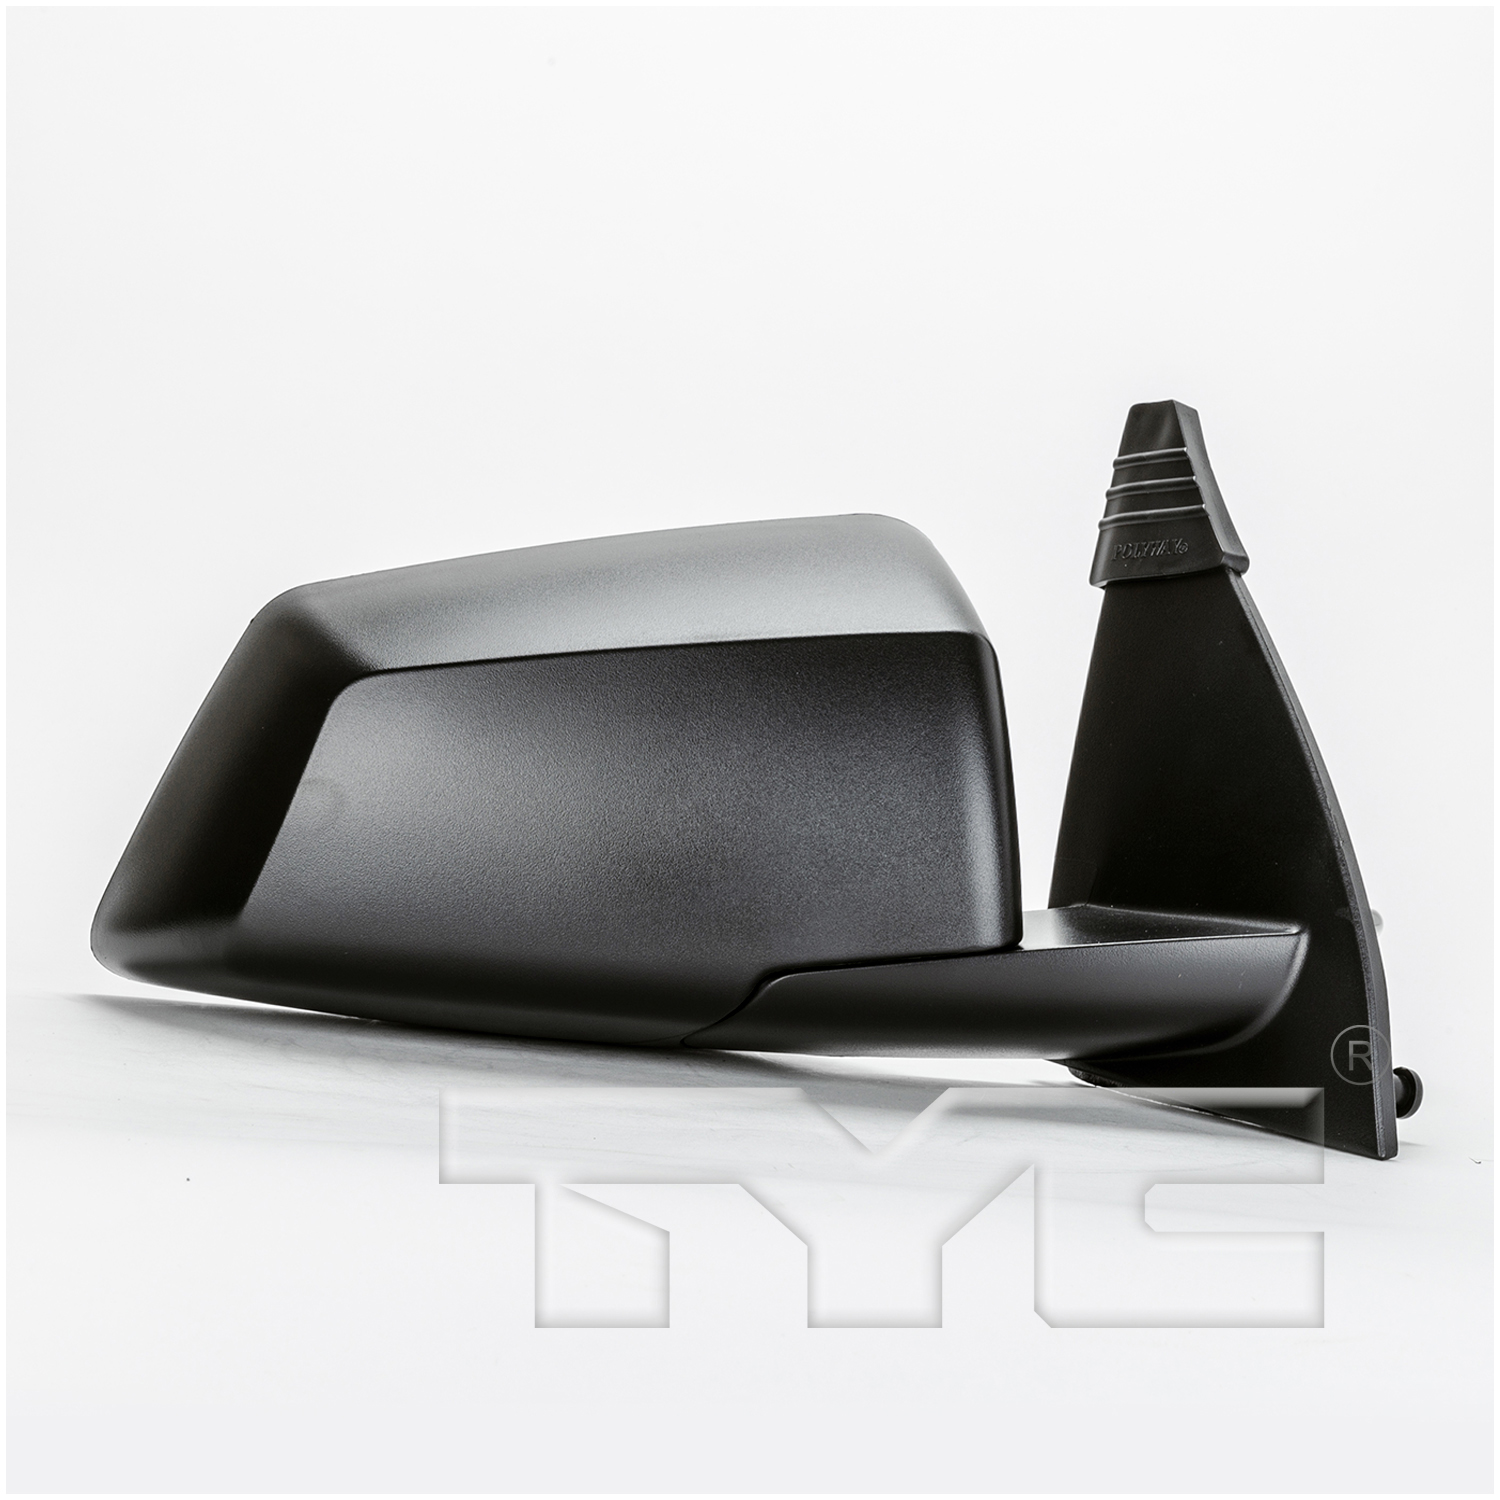 Aftermarket MIRRORS for GMC - ACADIA LIMITED, ACADIA LIMITED,17-17,RT Mirror outside rear view